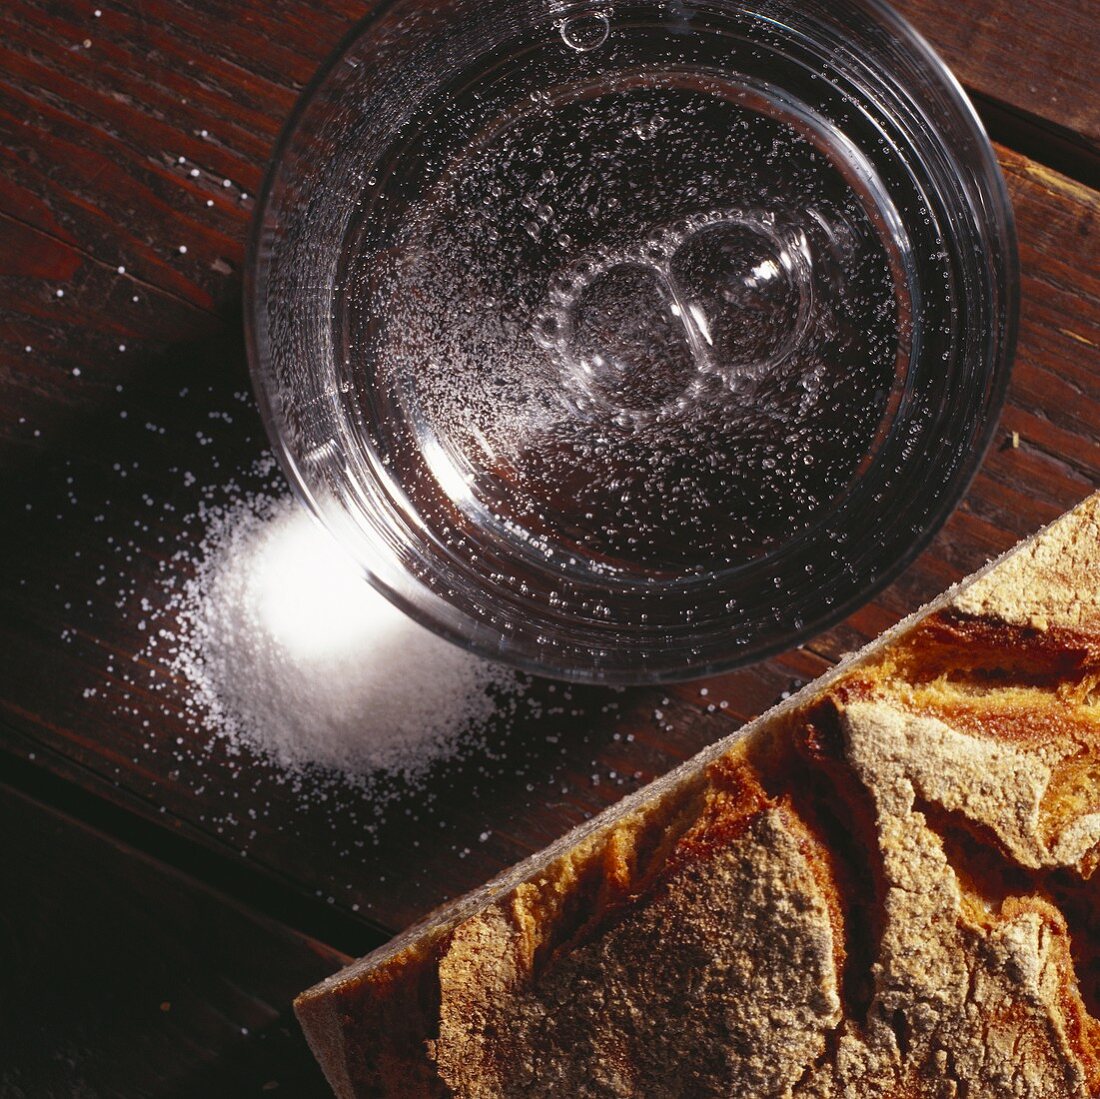 Farmhouse bread, salt and glass of water (from above)